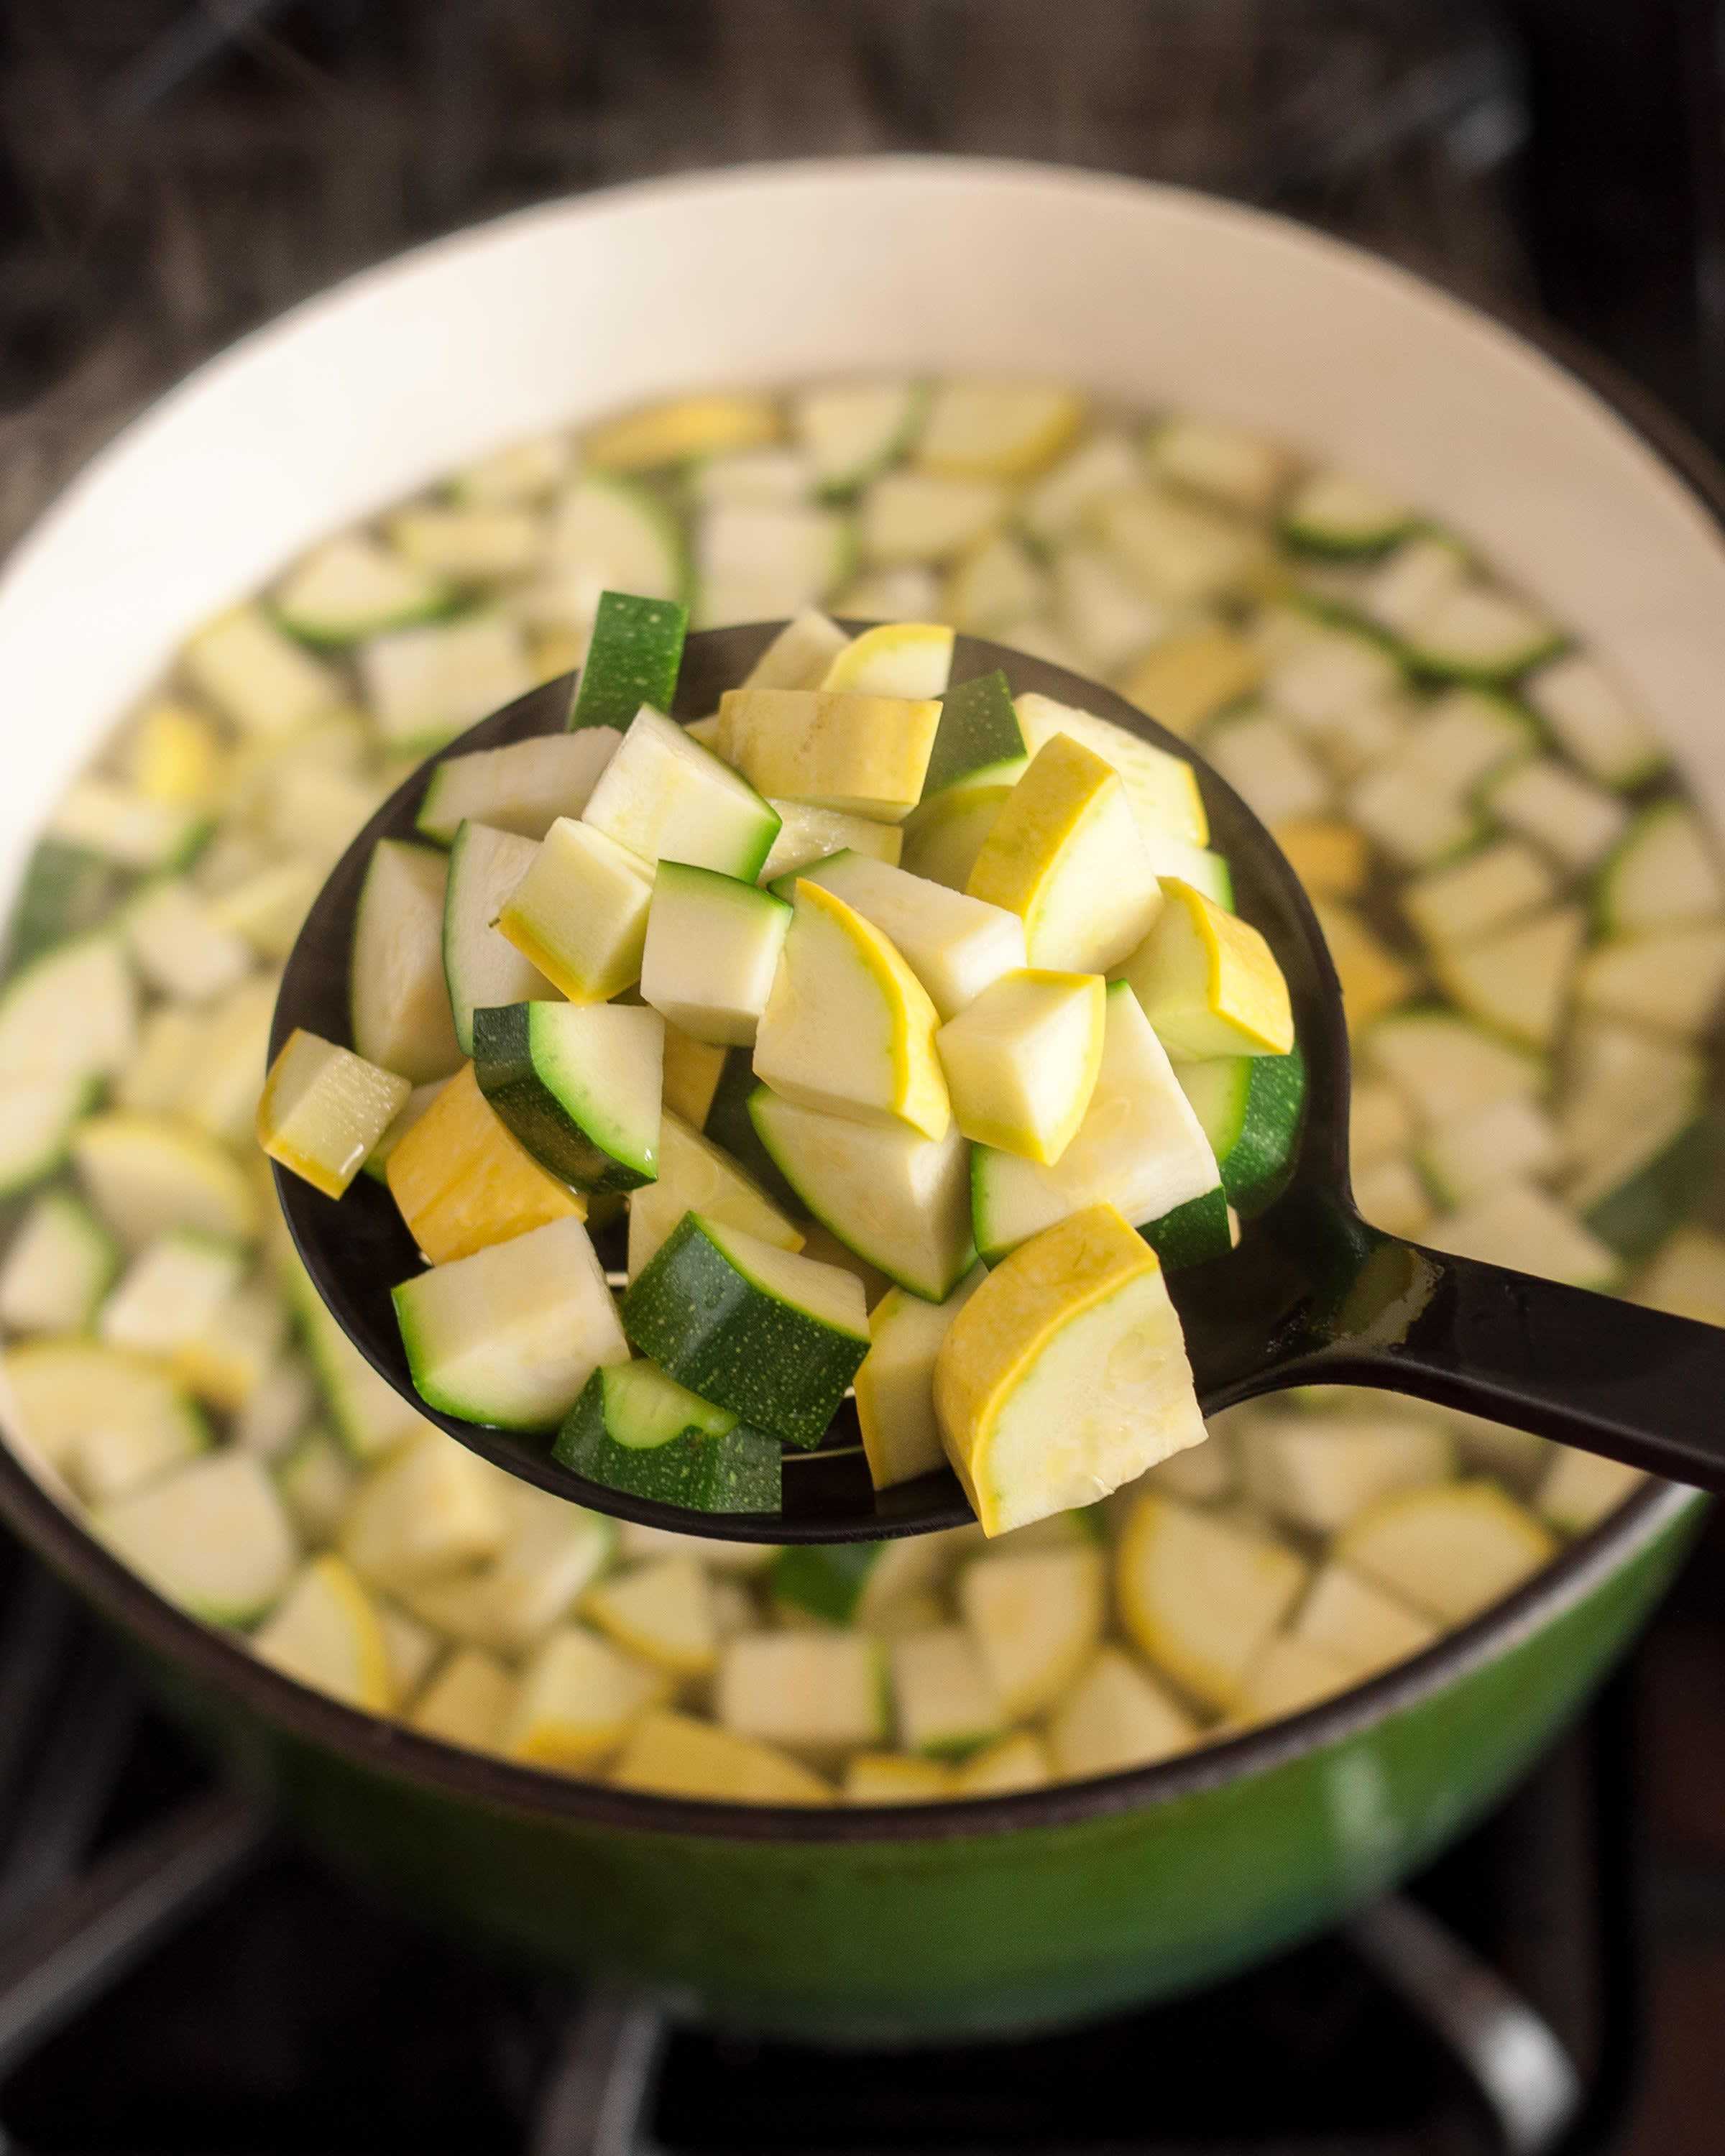 Our complete guide to freezing courgettes